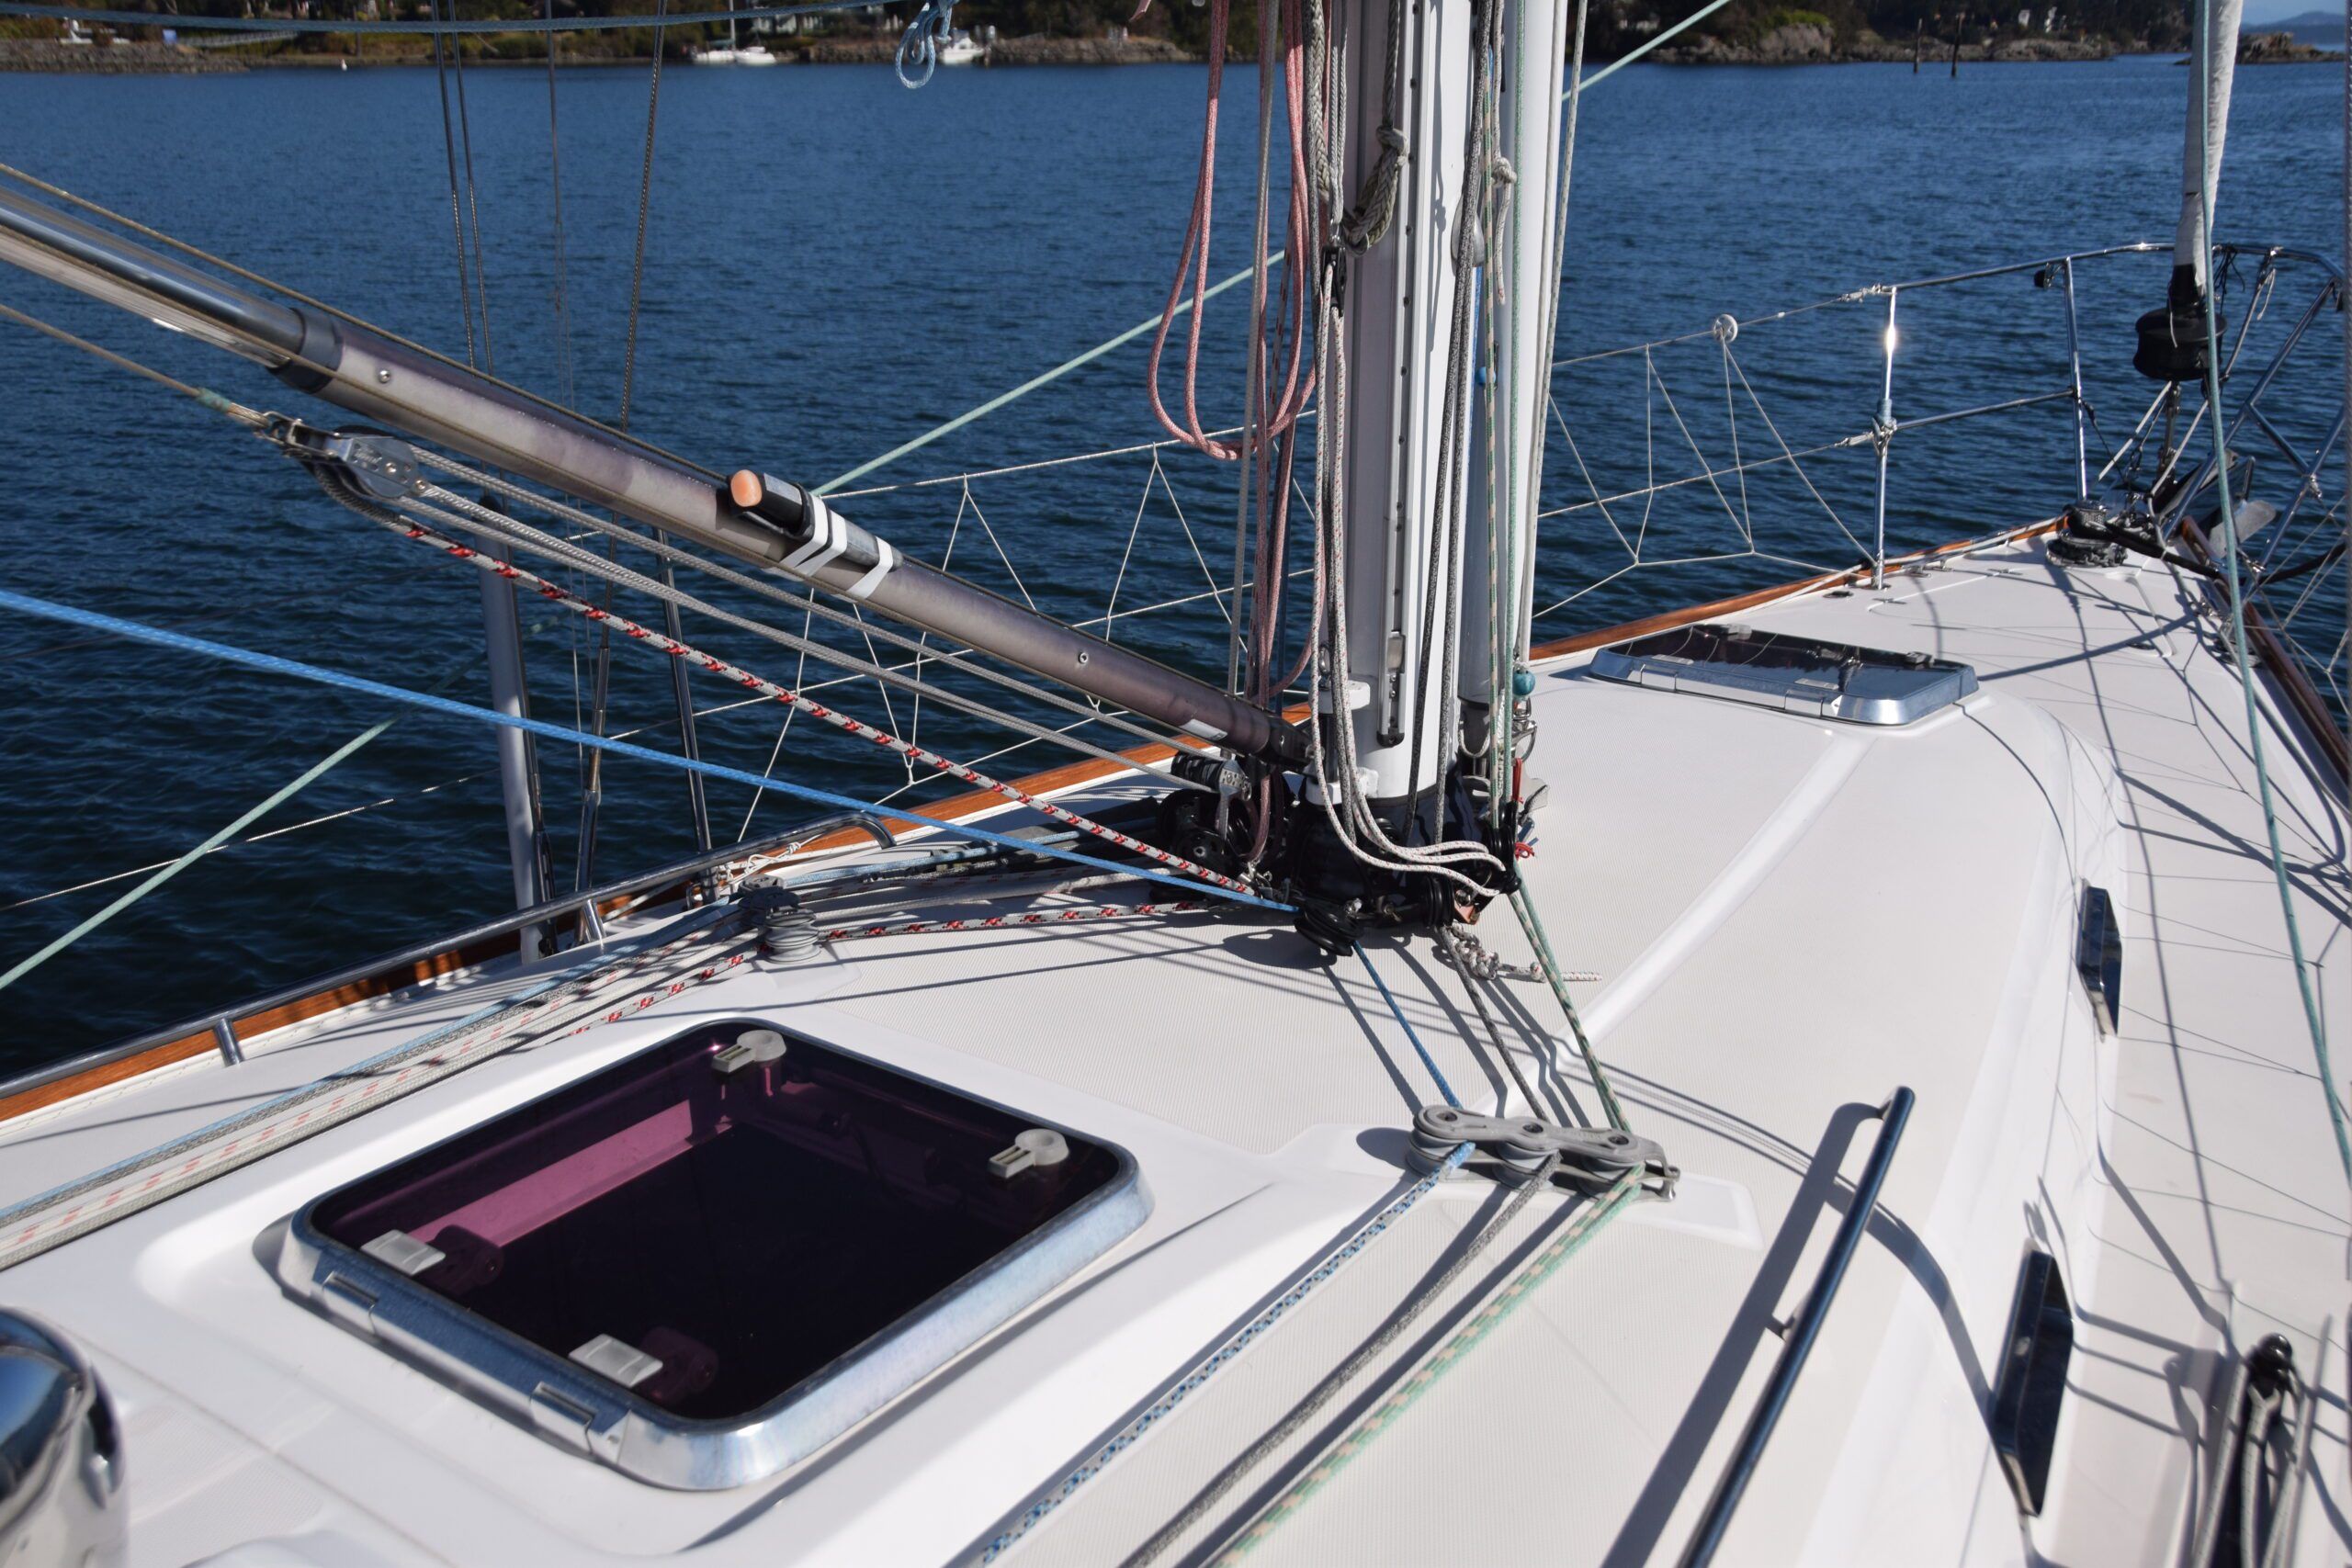 Clean foredeck